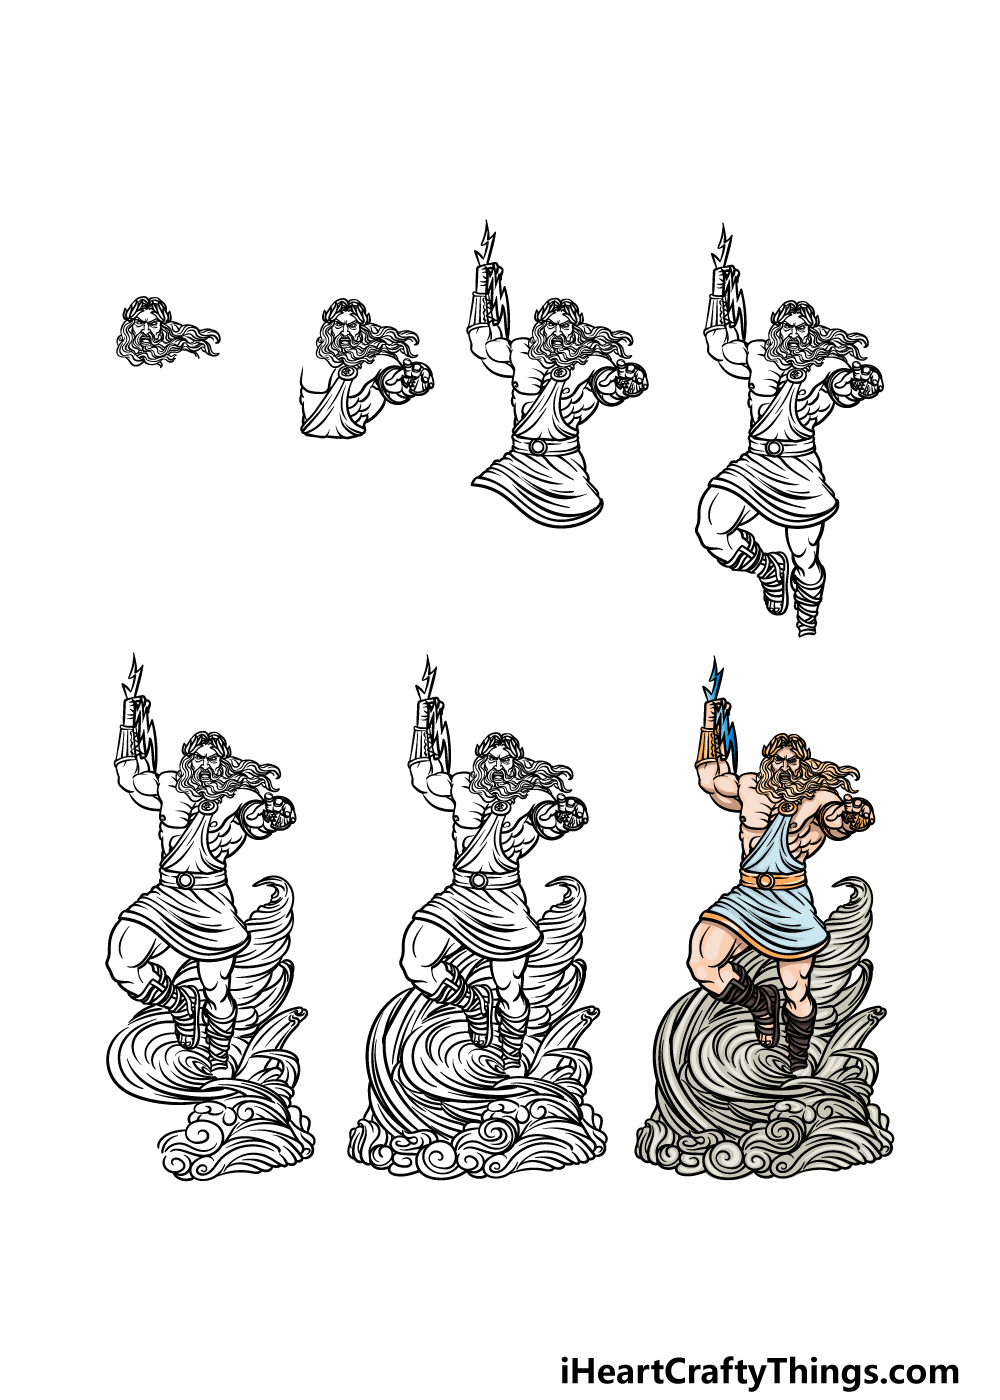 howto draw Zeus in 7 steps